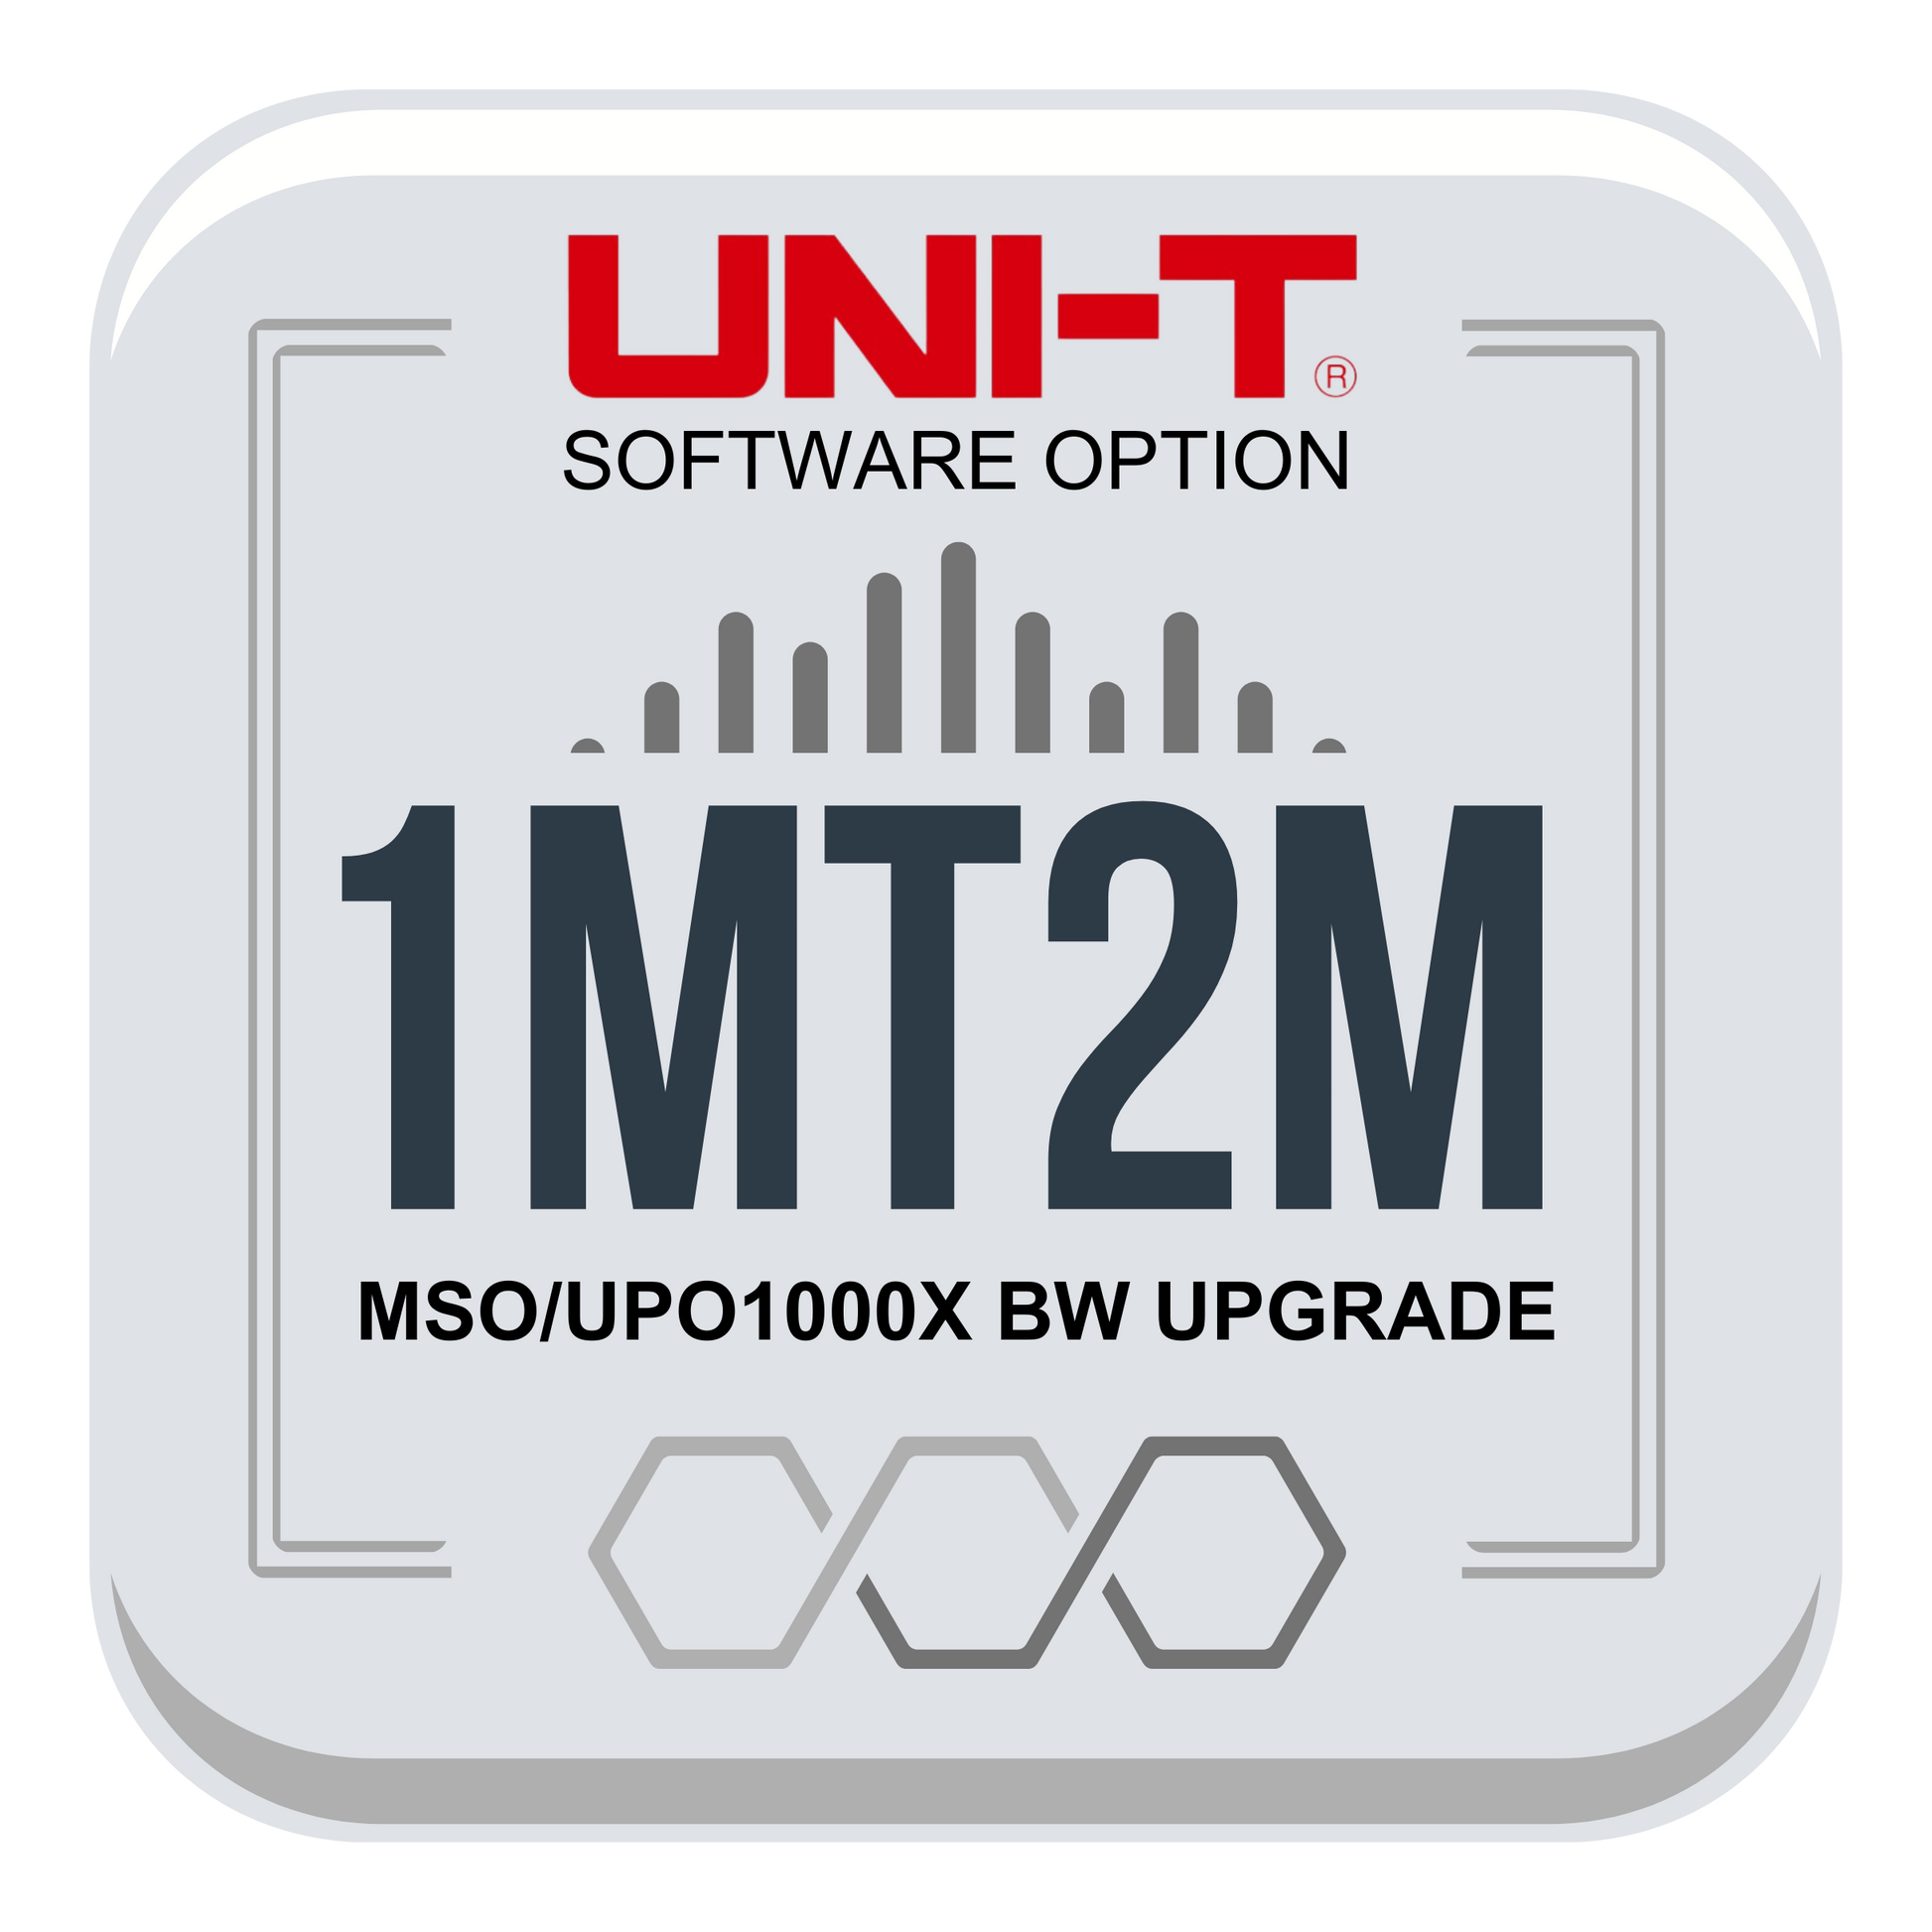 MSO/UPO1000X-1MT2M 200MHz BW Upgrade for MSO/UPO1104